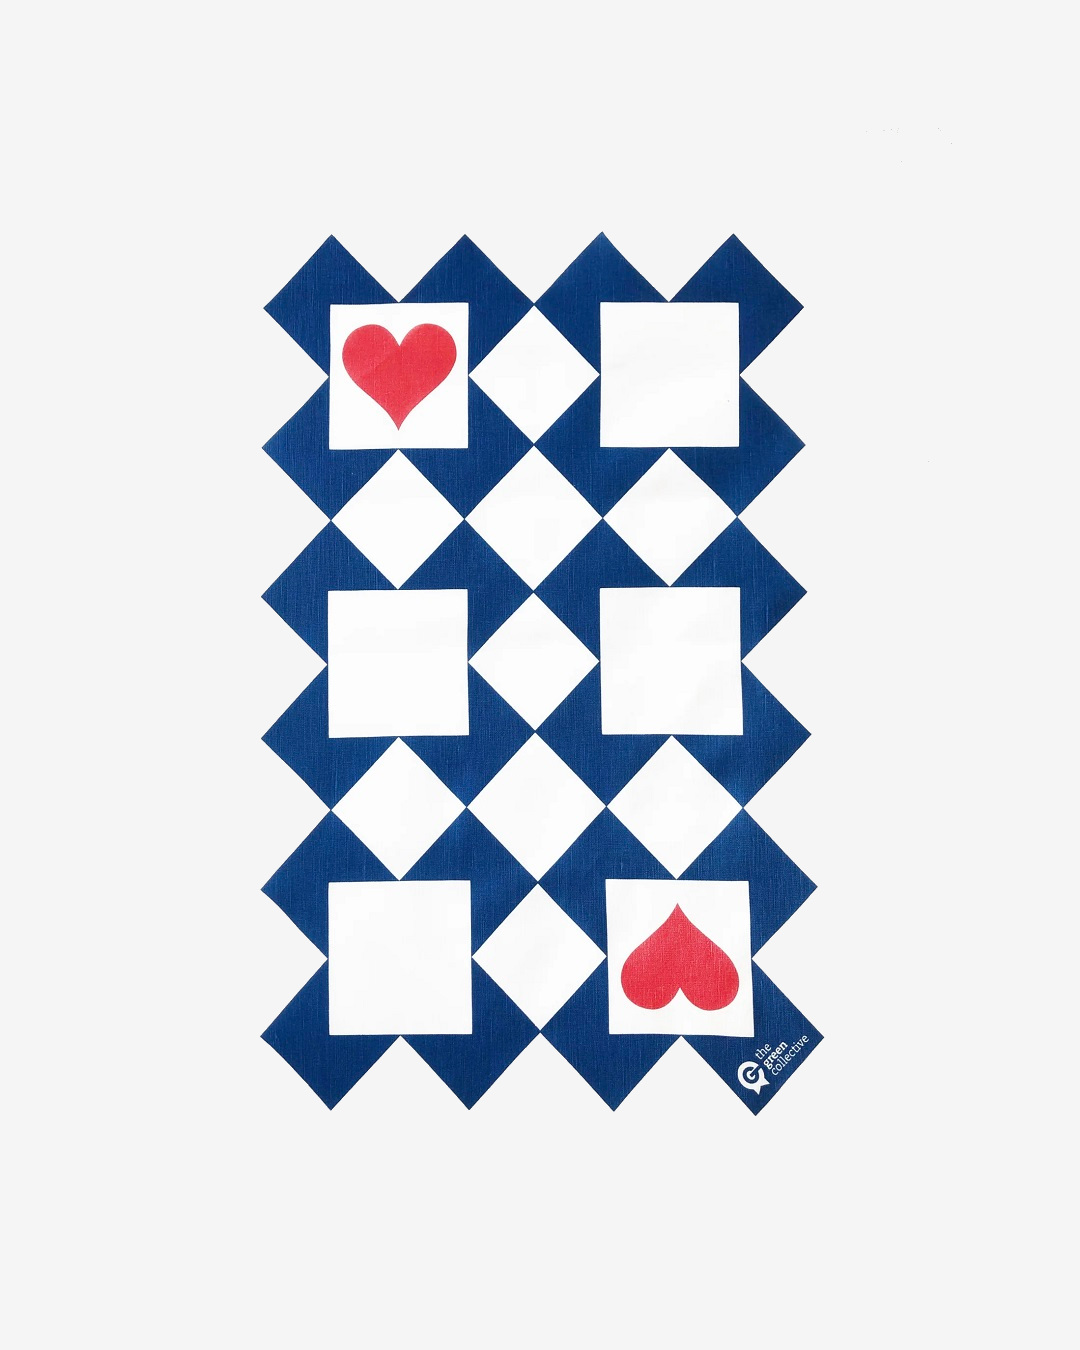 Tea towel in blue and white shapes with red hearts